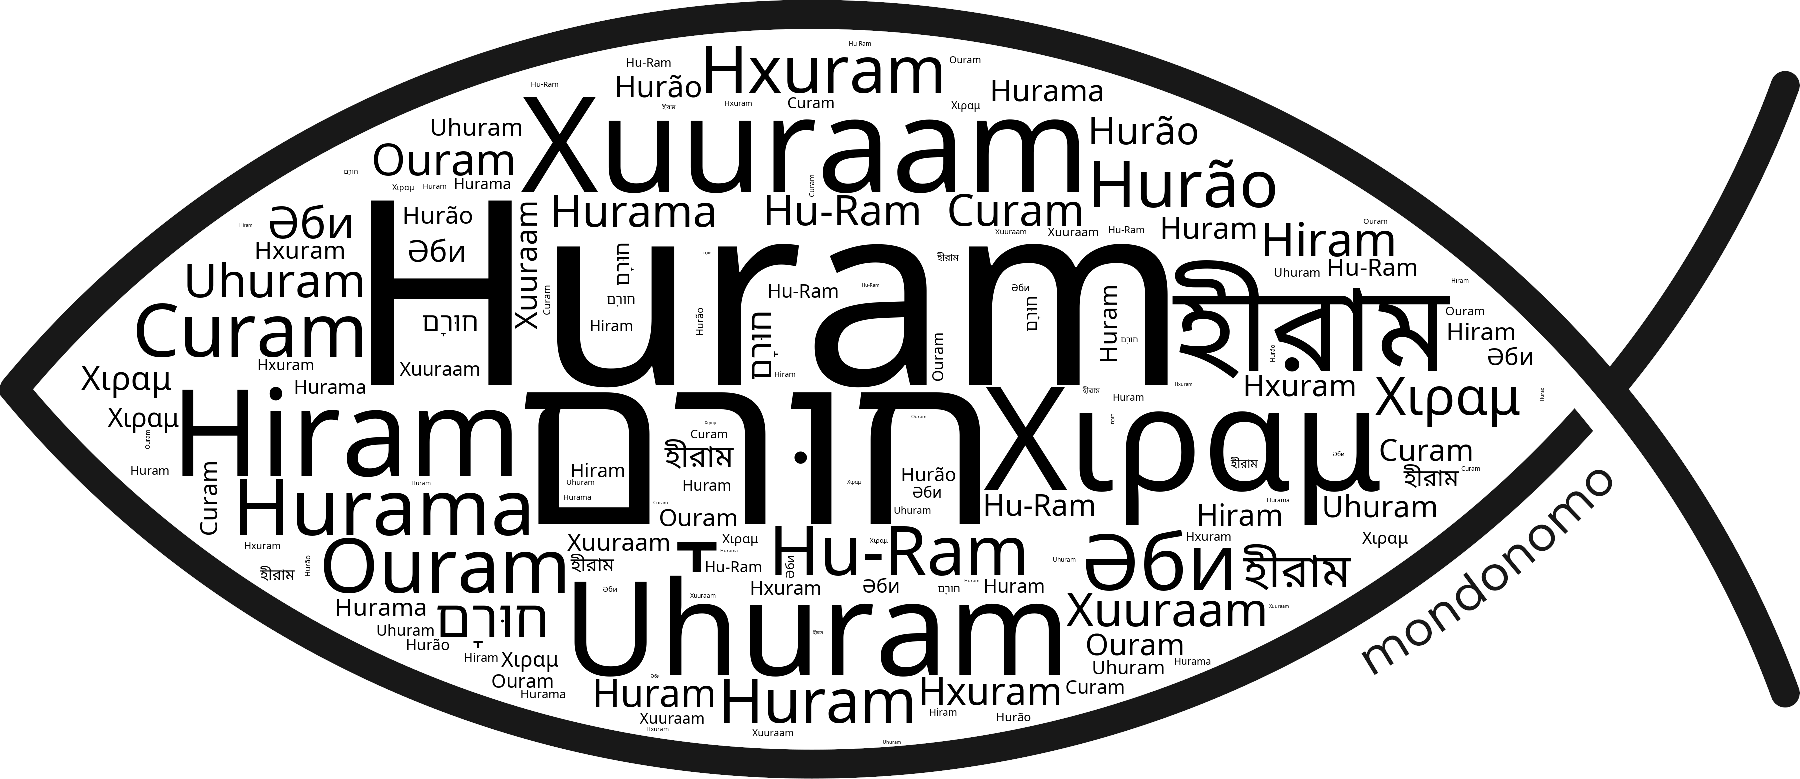 Name Huram in the world's Bibles